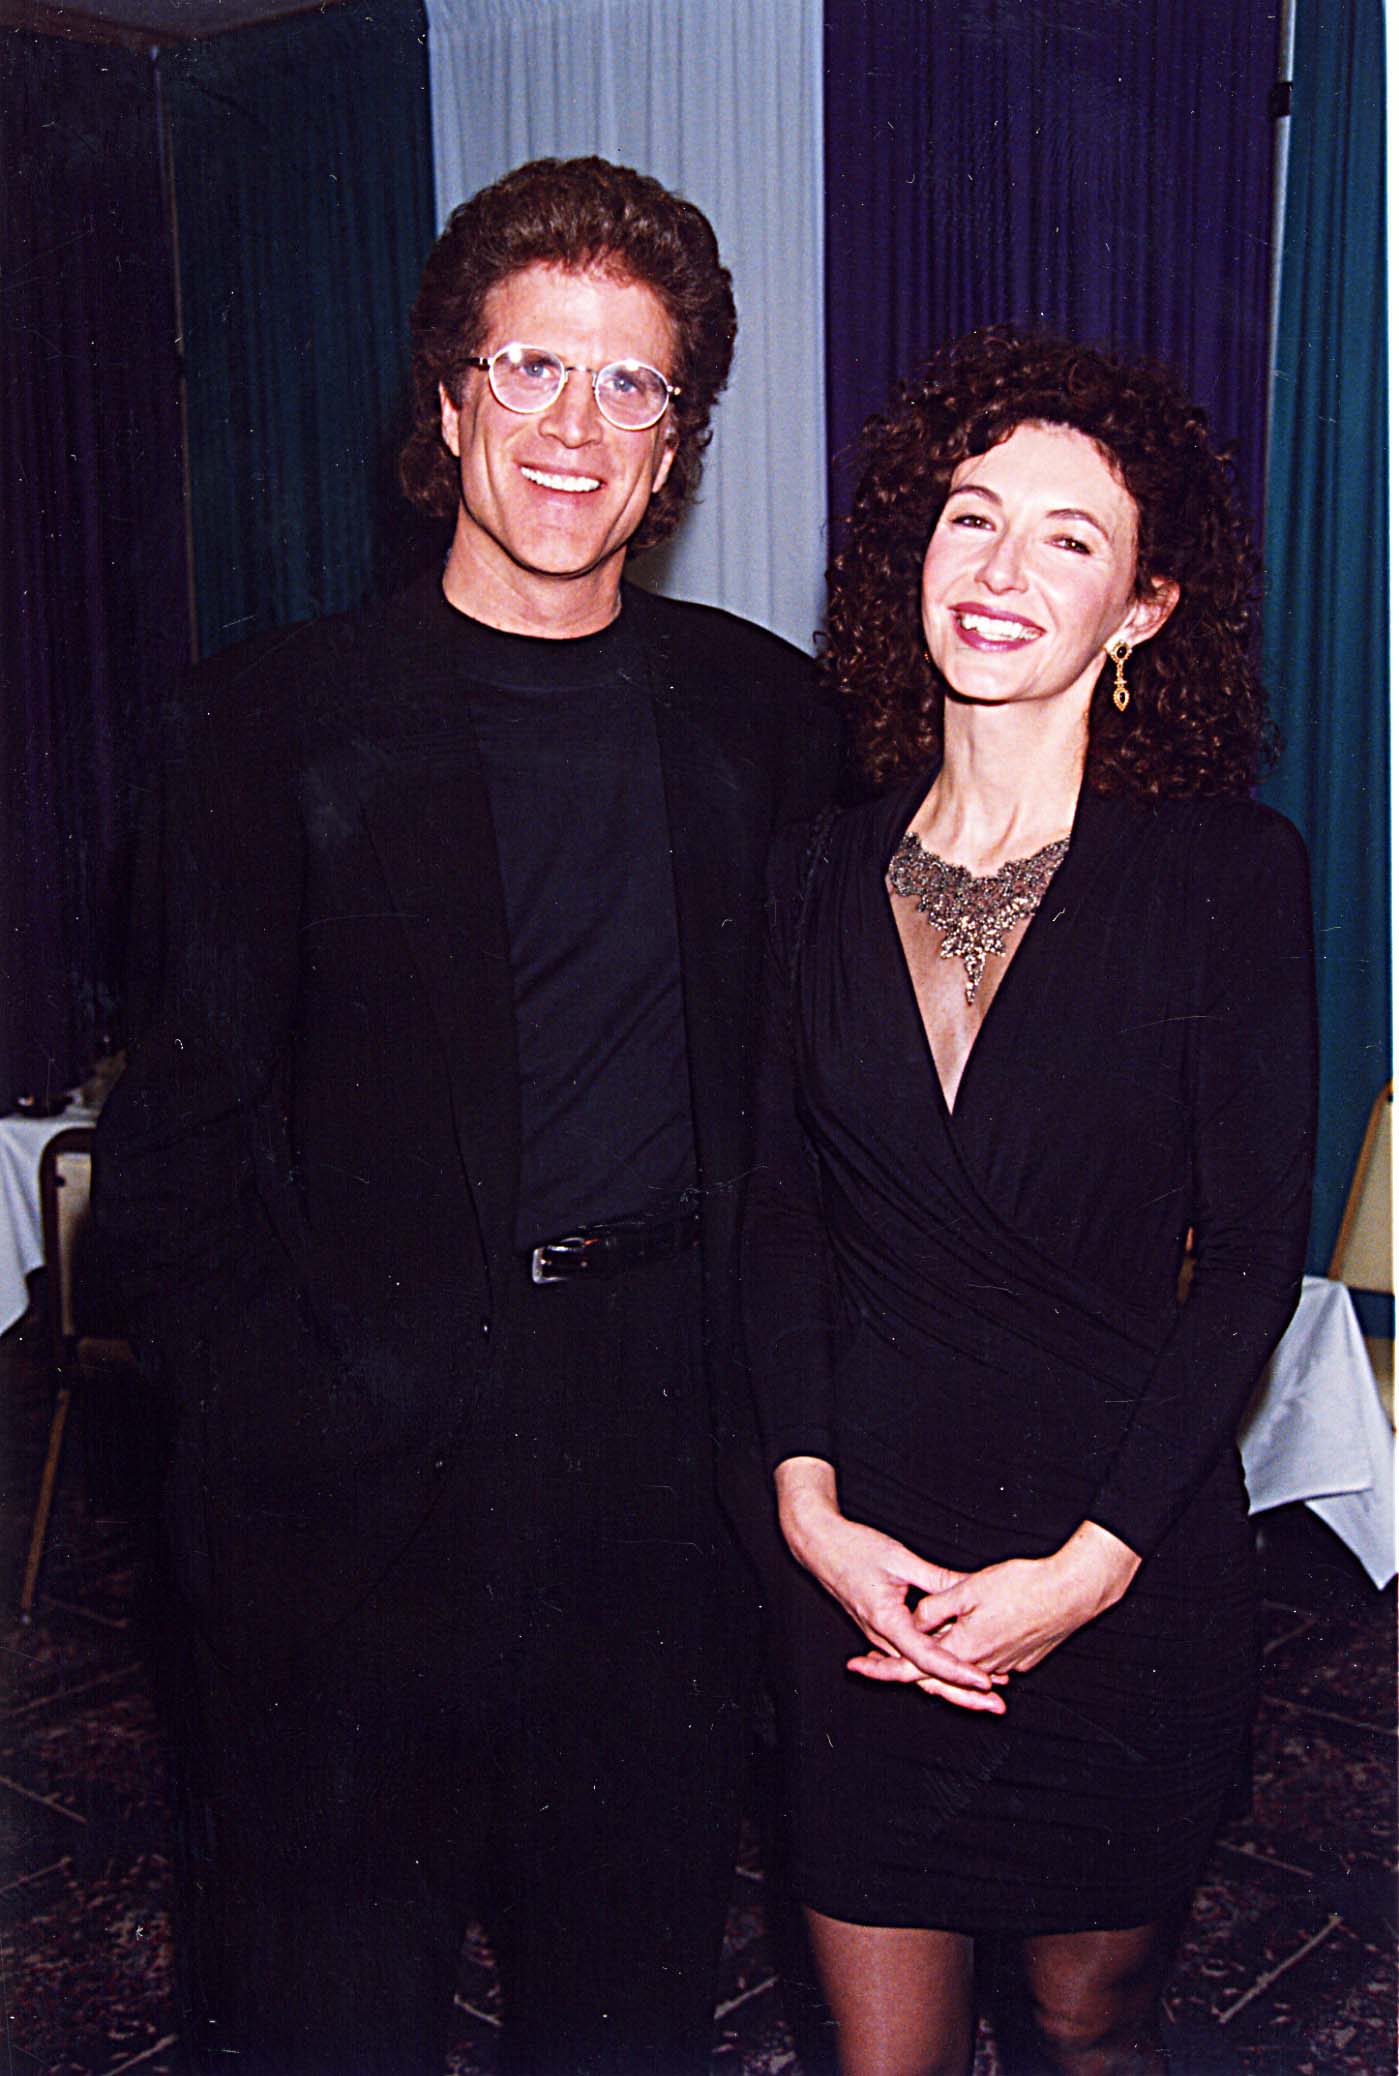 Ted Danson & Mary Steenburgen during 1994 ShoWest in Las Vegas, Nevada, United States. | Source: Getty Images